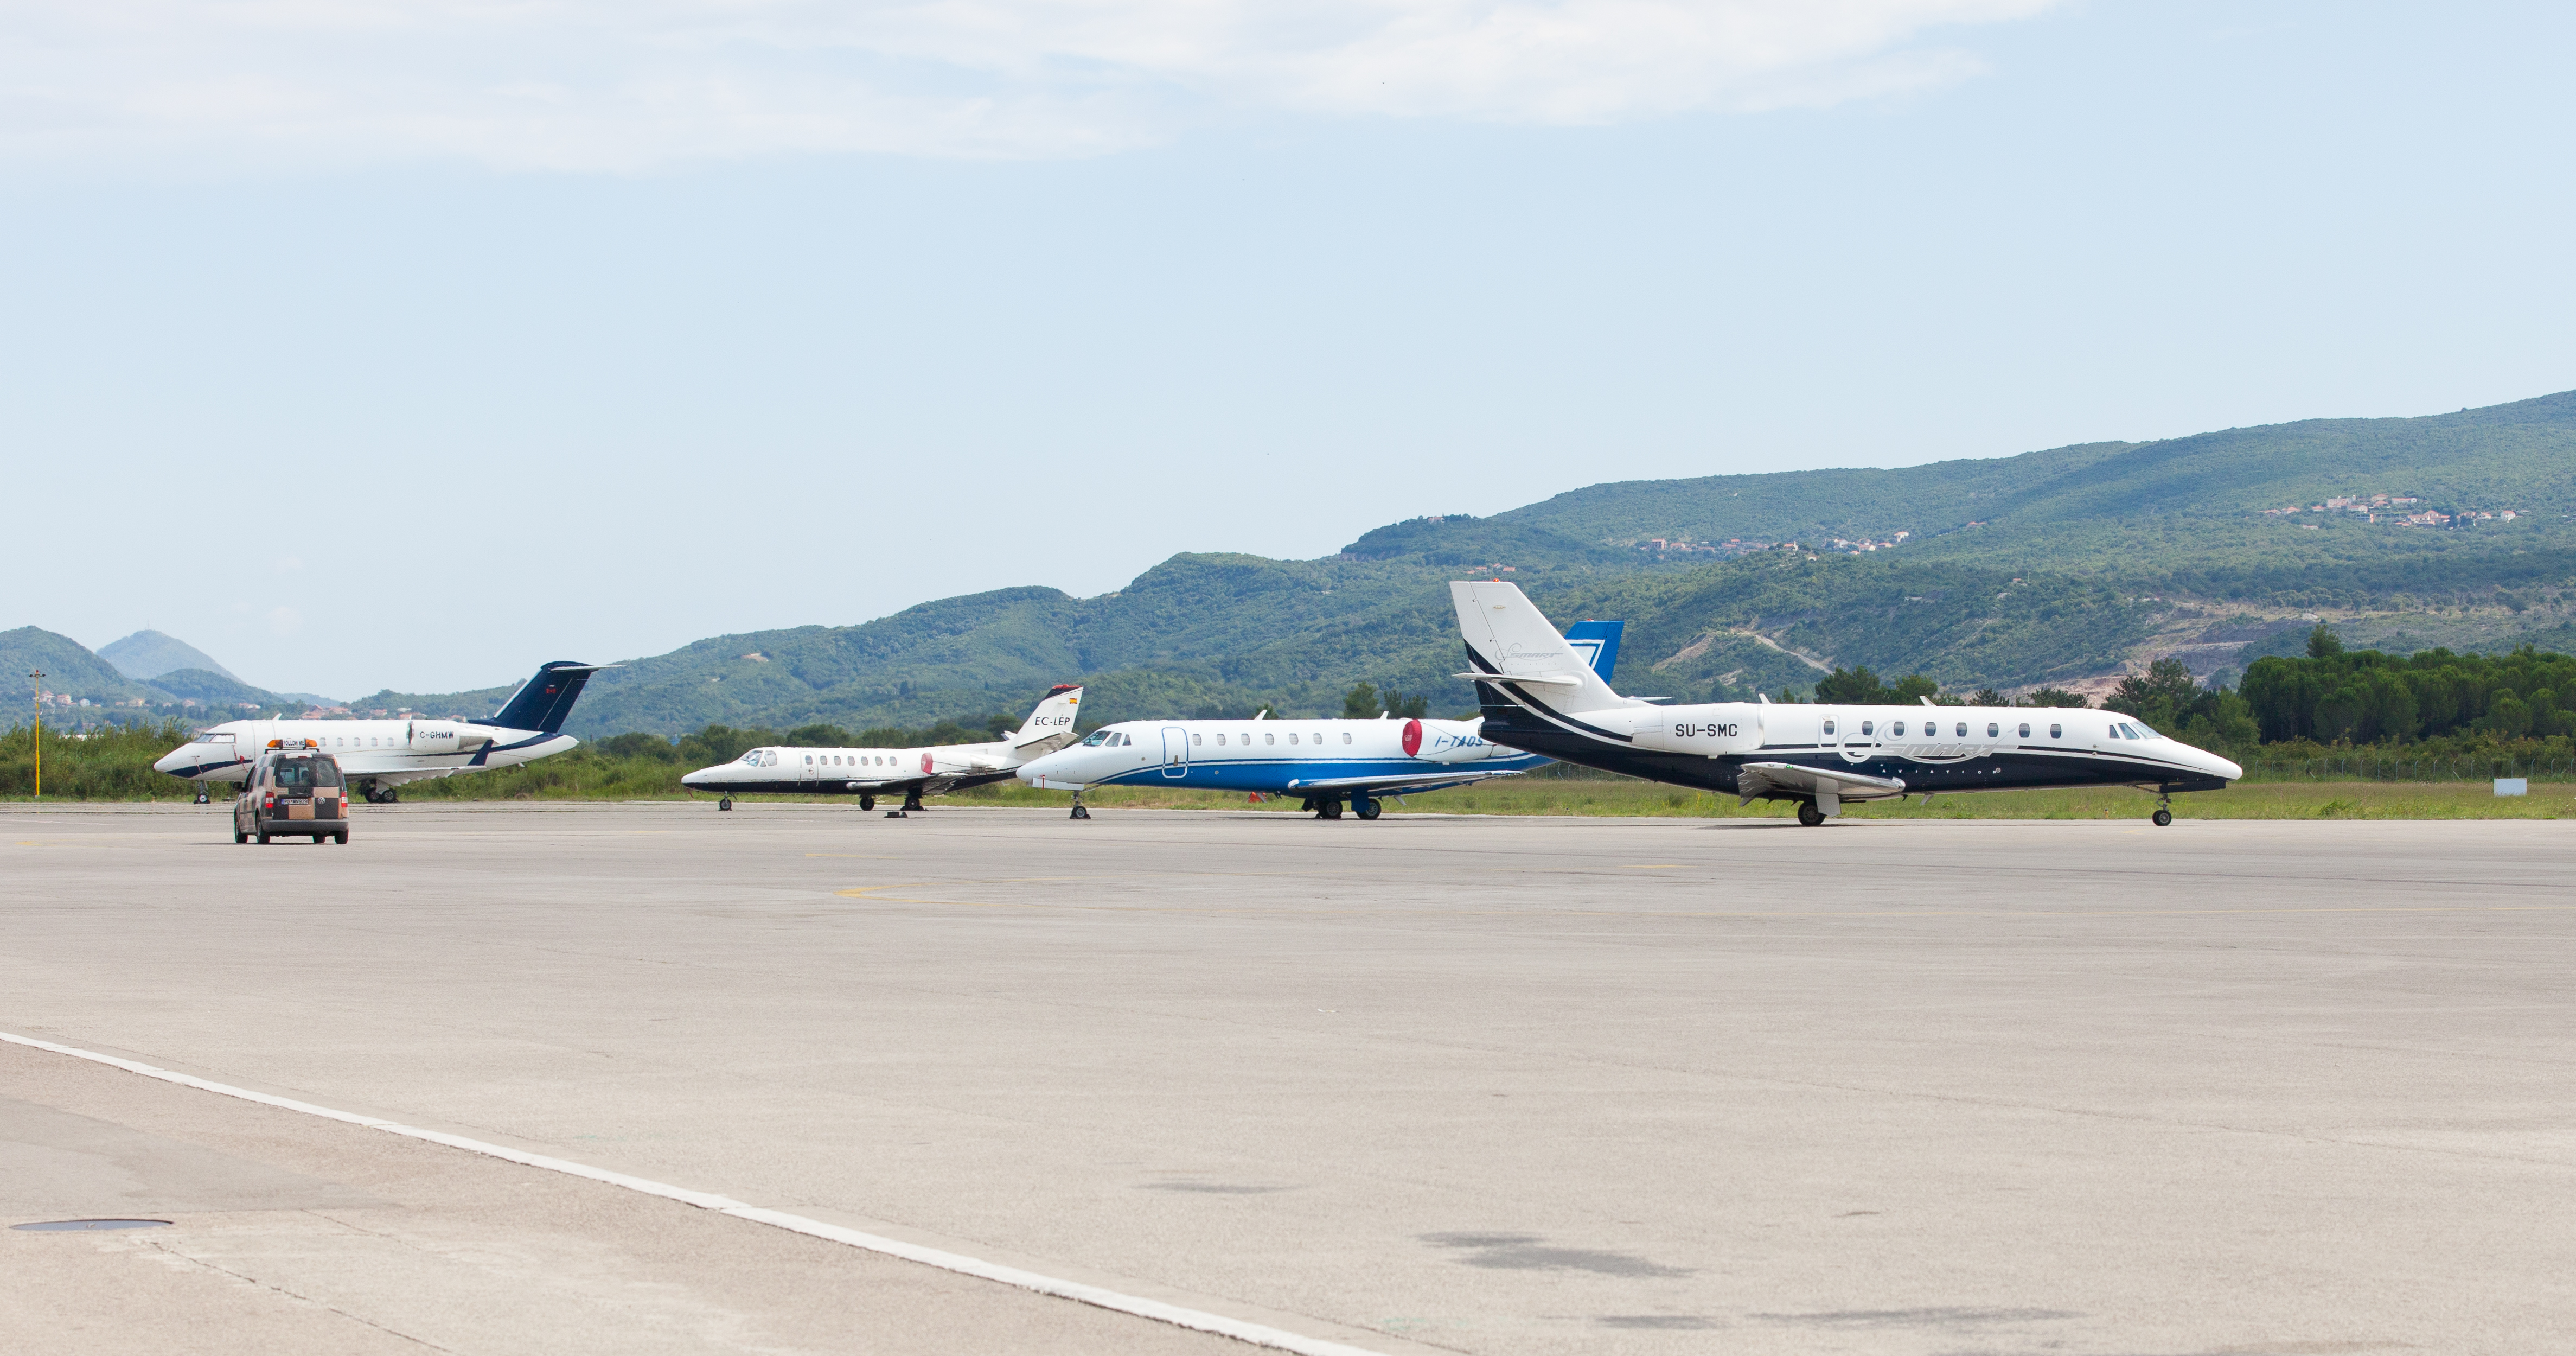 airplanes photographed in Tivat airport, Montenegro in August 2014, picture 4